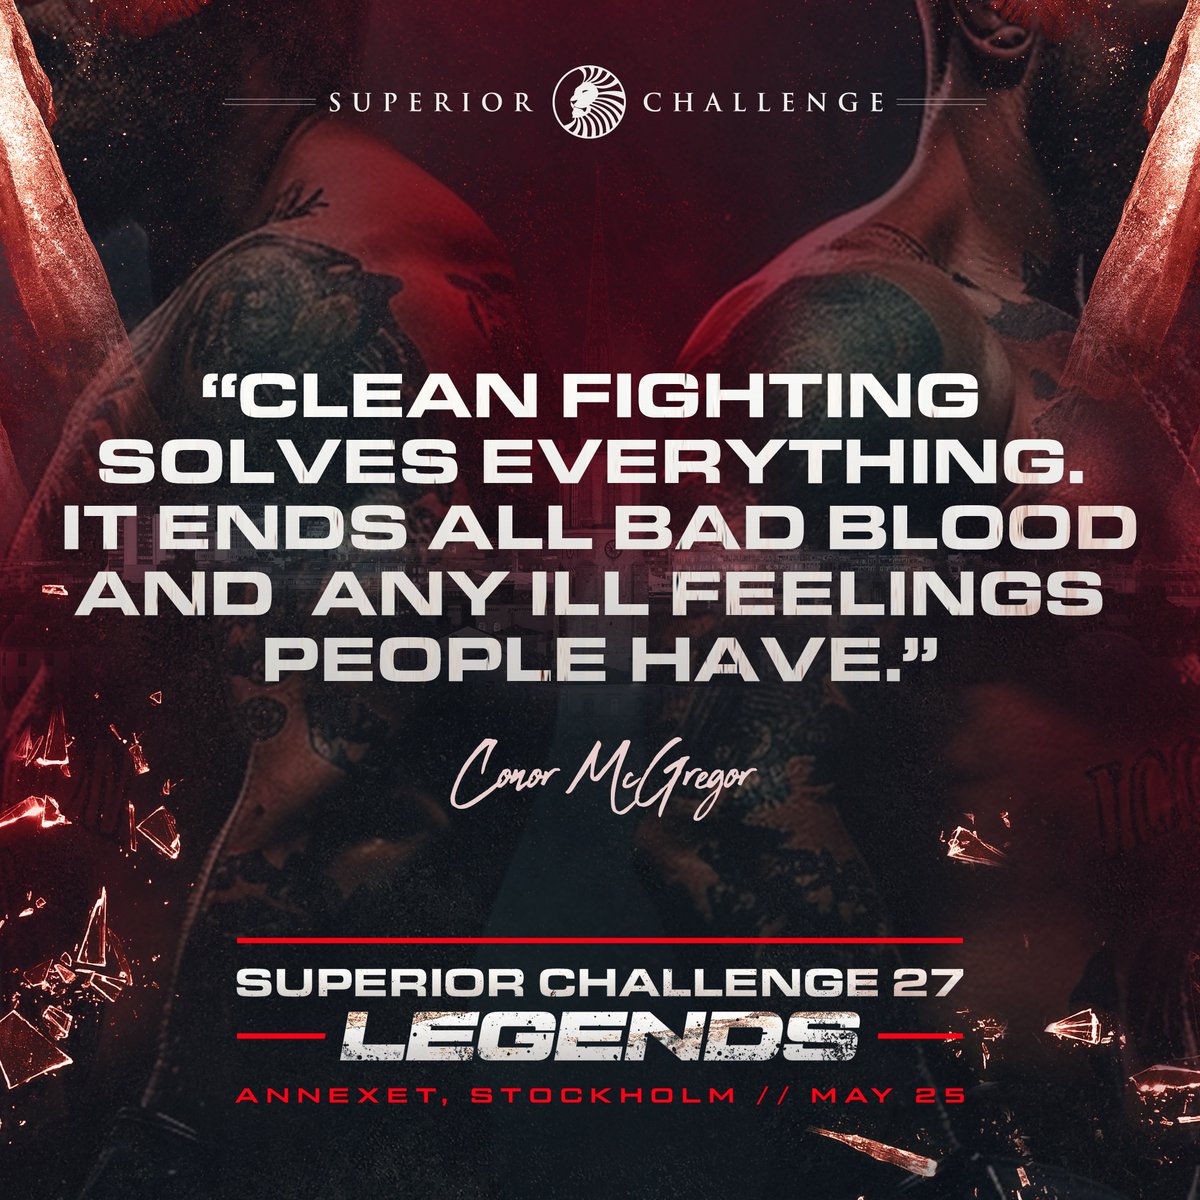 Embrace the warrior's mindset!

“Clean fighting solves everything. It ends all bad blood and any ill feelings people have.” – Connor McGregor

#SuperiorChallenge #MMA #WarriorMindset #NeverGiveUp #Fearless #Motivation #ConnorMcGregor